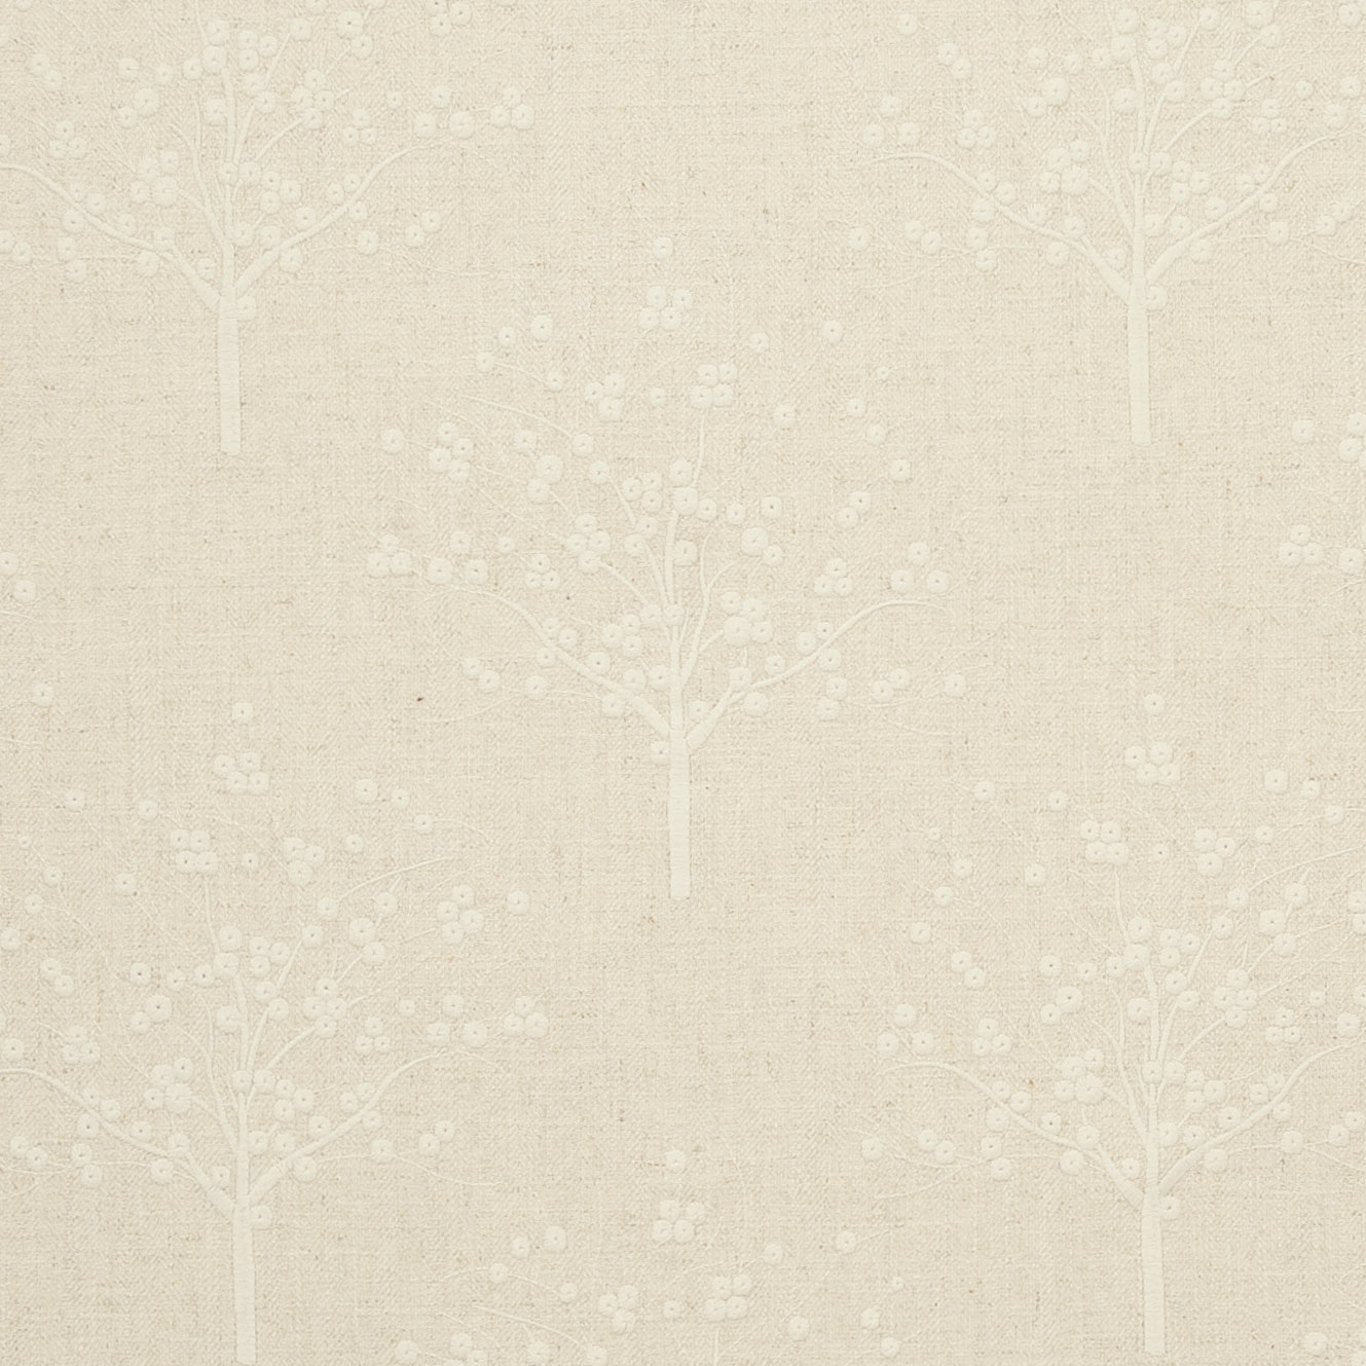 Bowood Fabric by Clarke & Clarke - F0733/03 - Natural